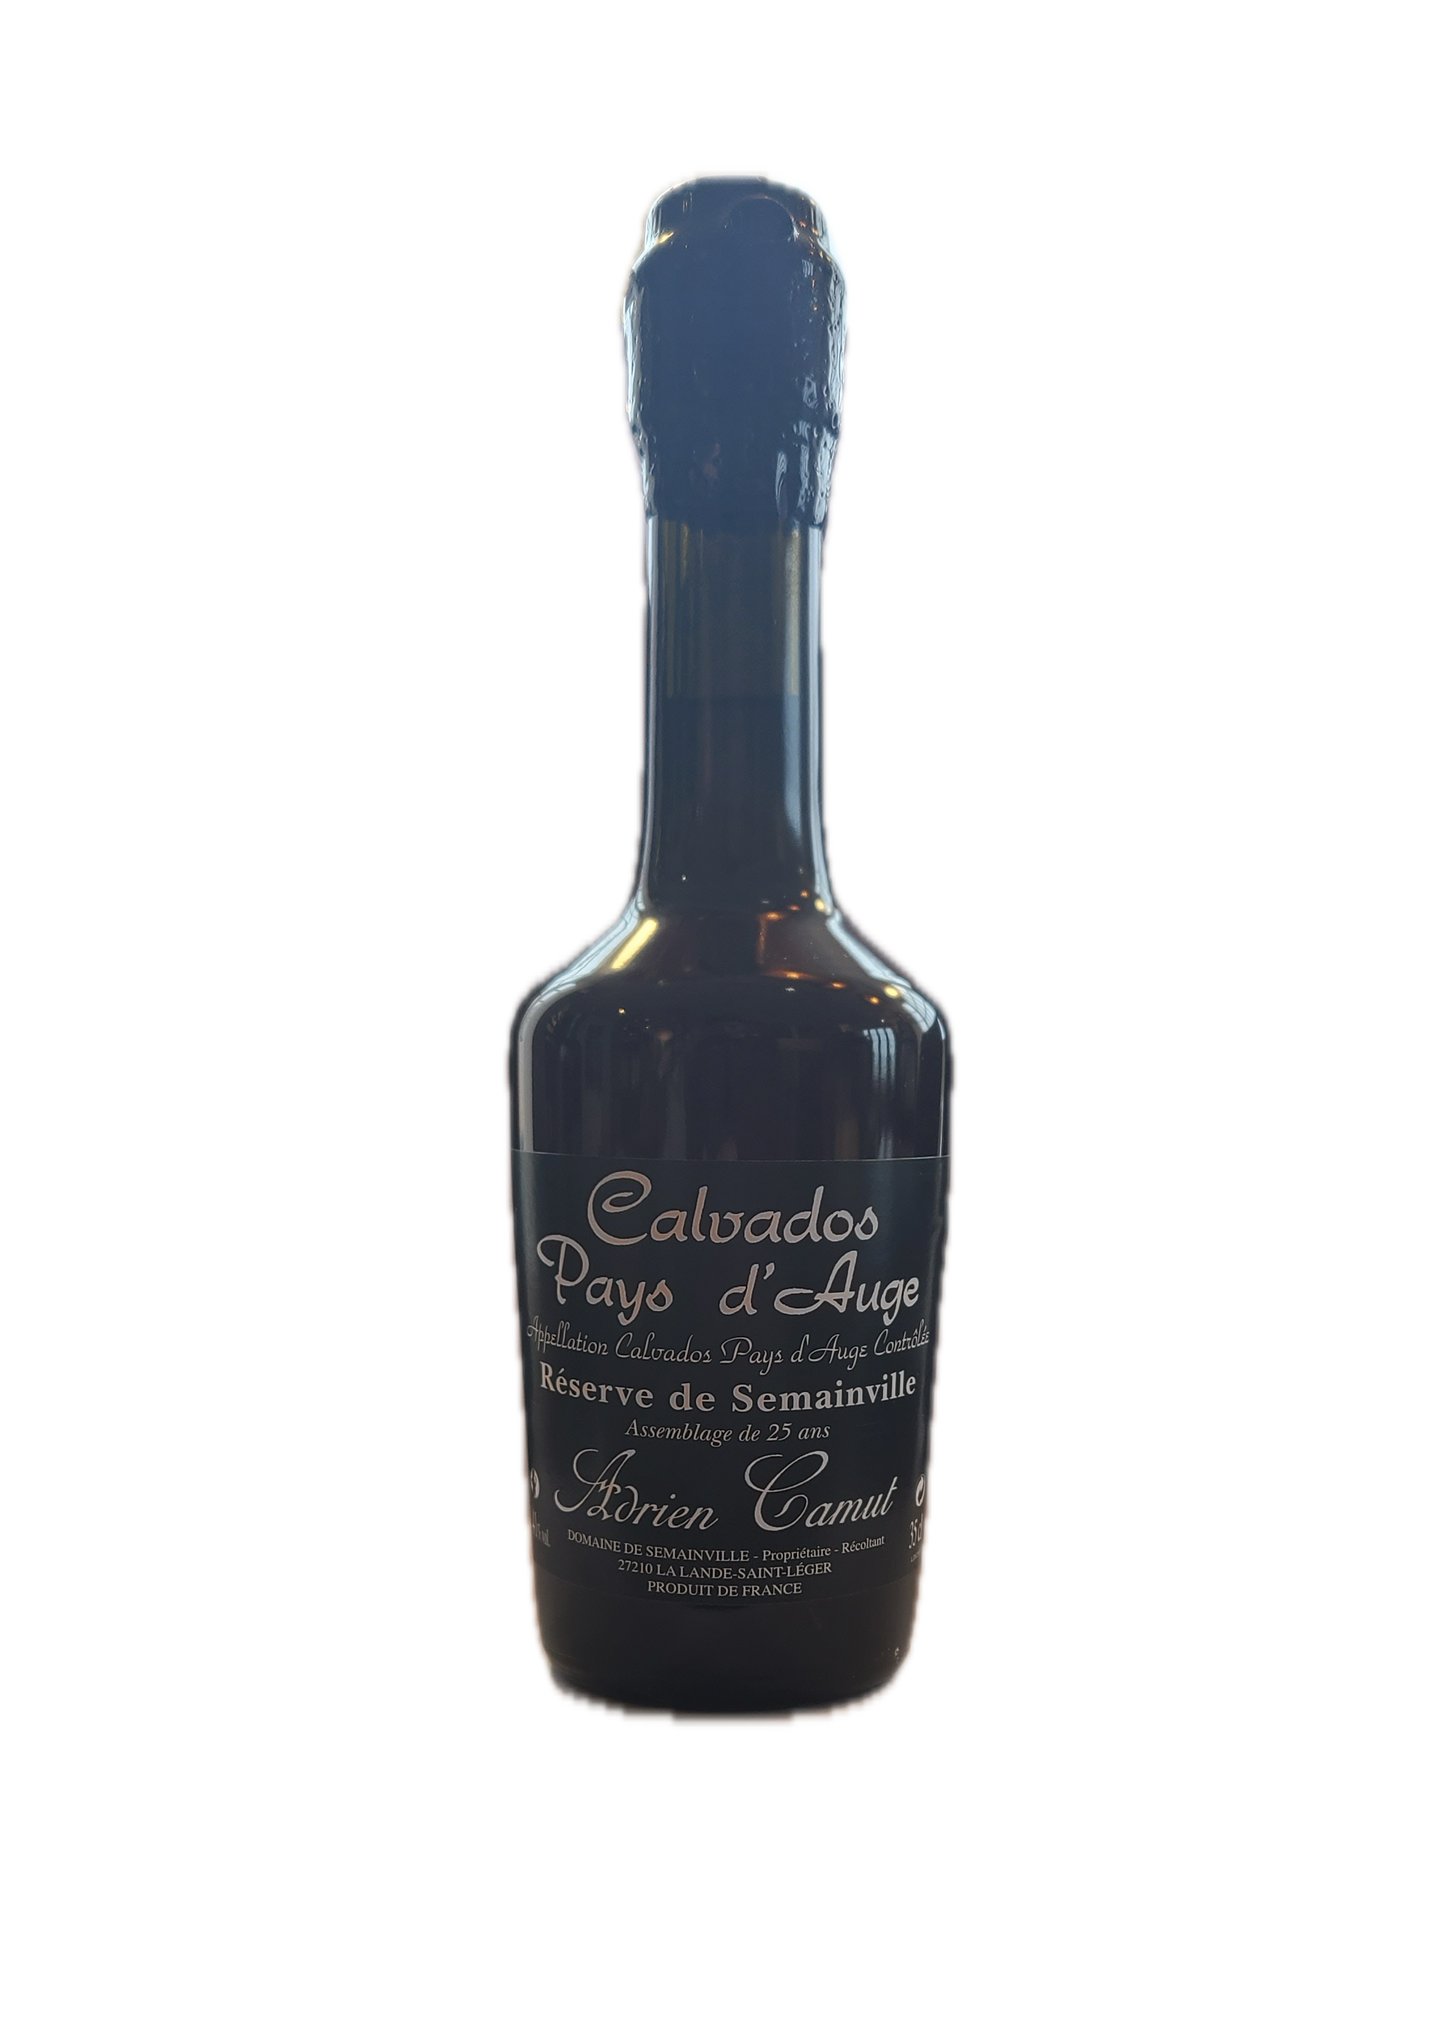 CALVADOS AOC Pays d'Auge 25 years Reserve of Semainville Camut 41%